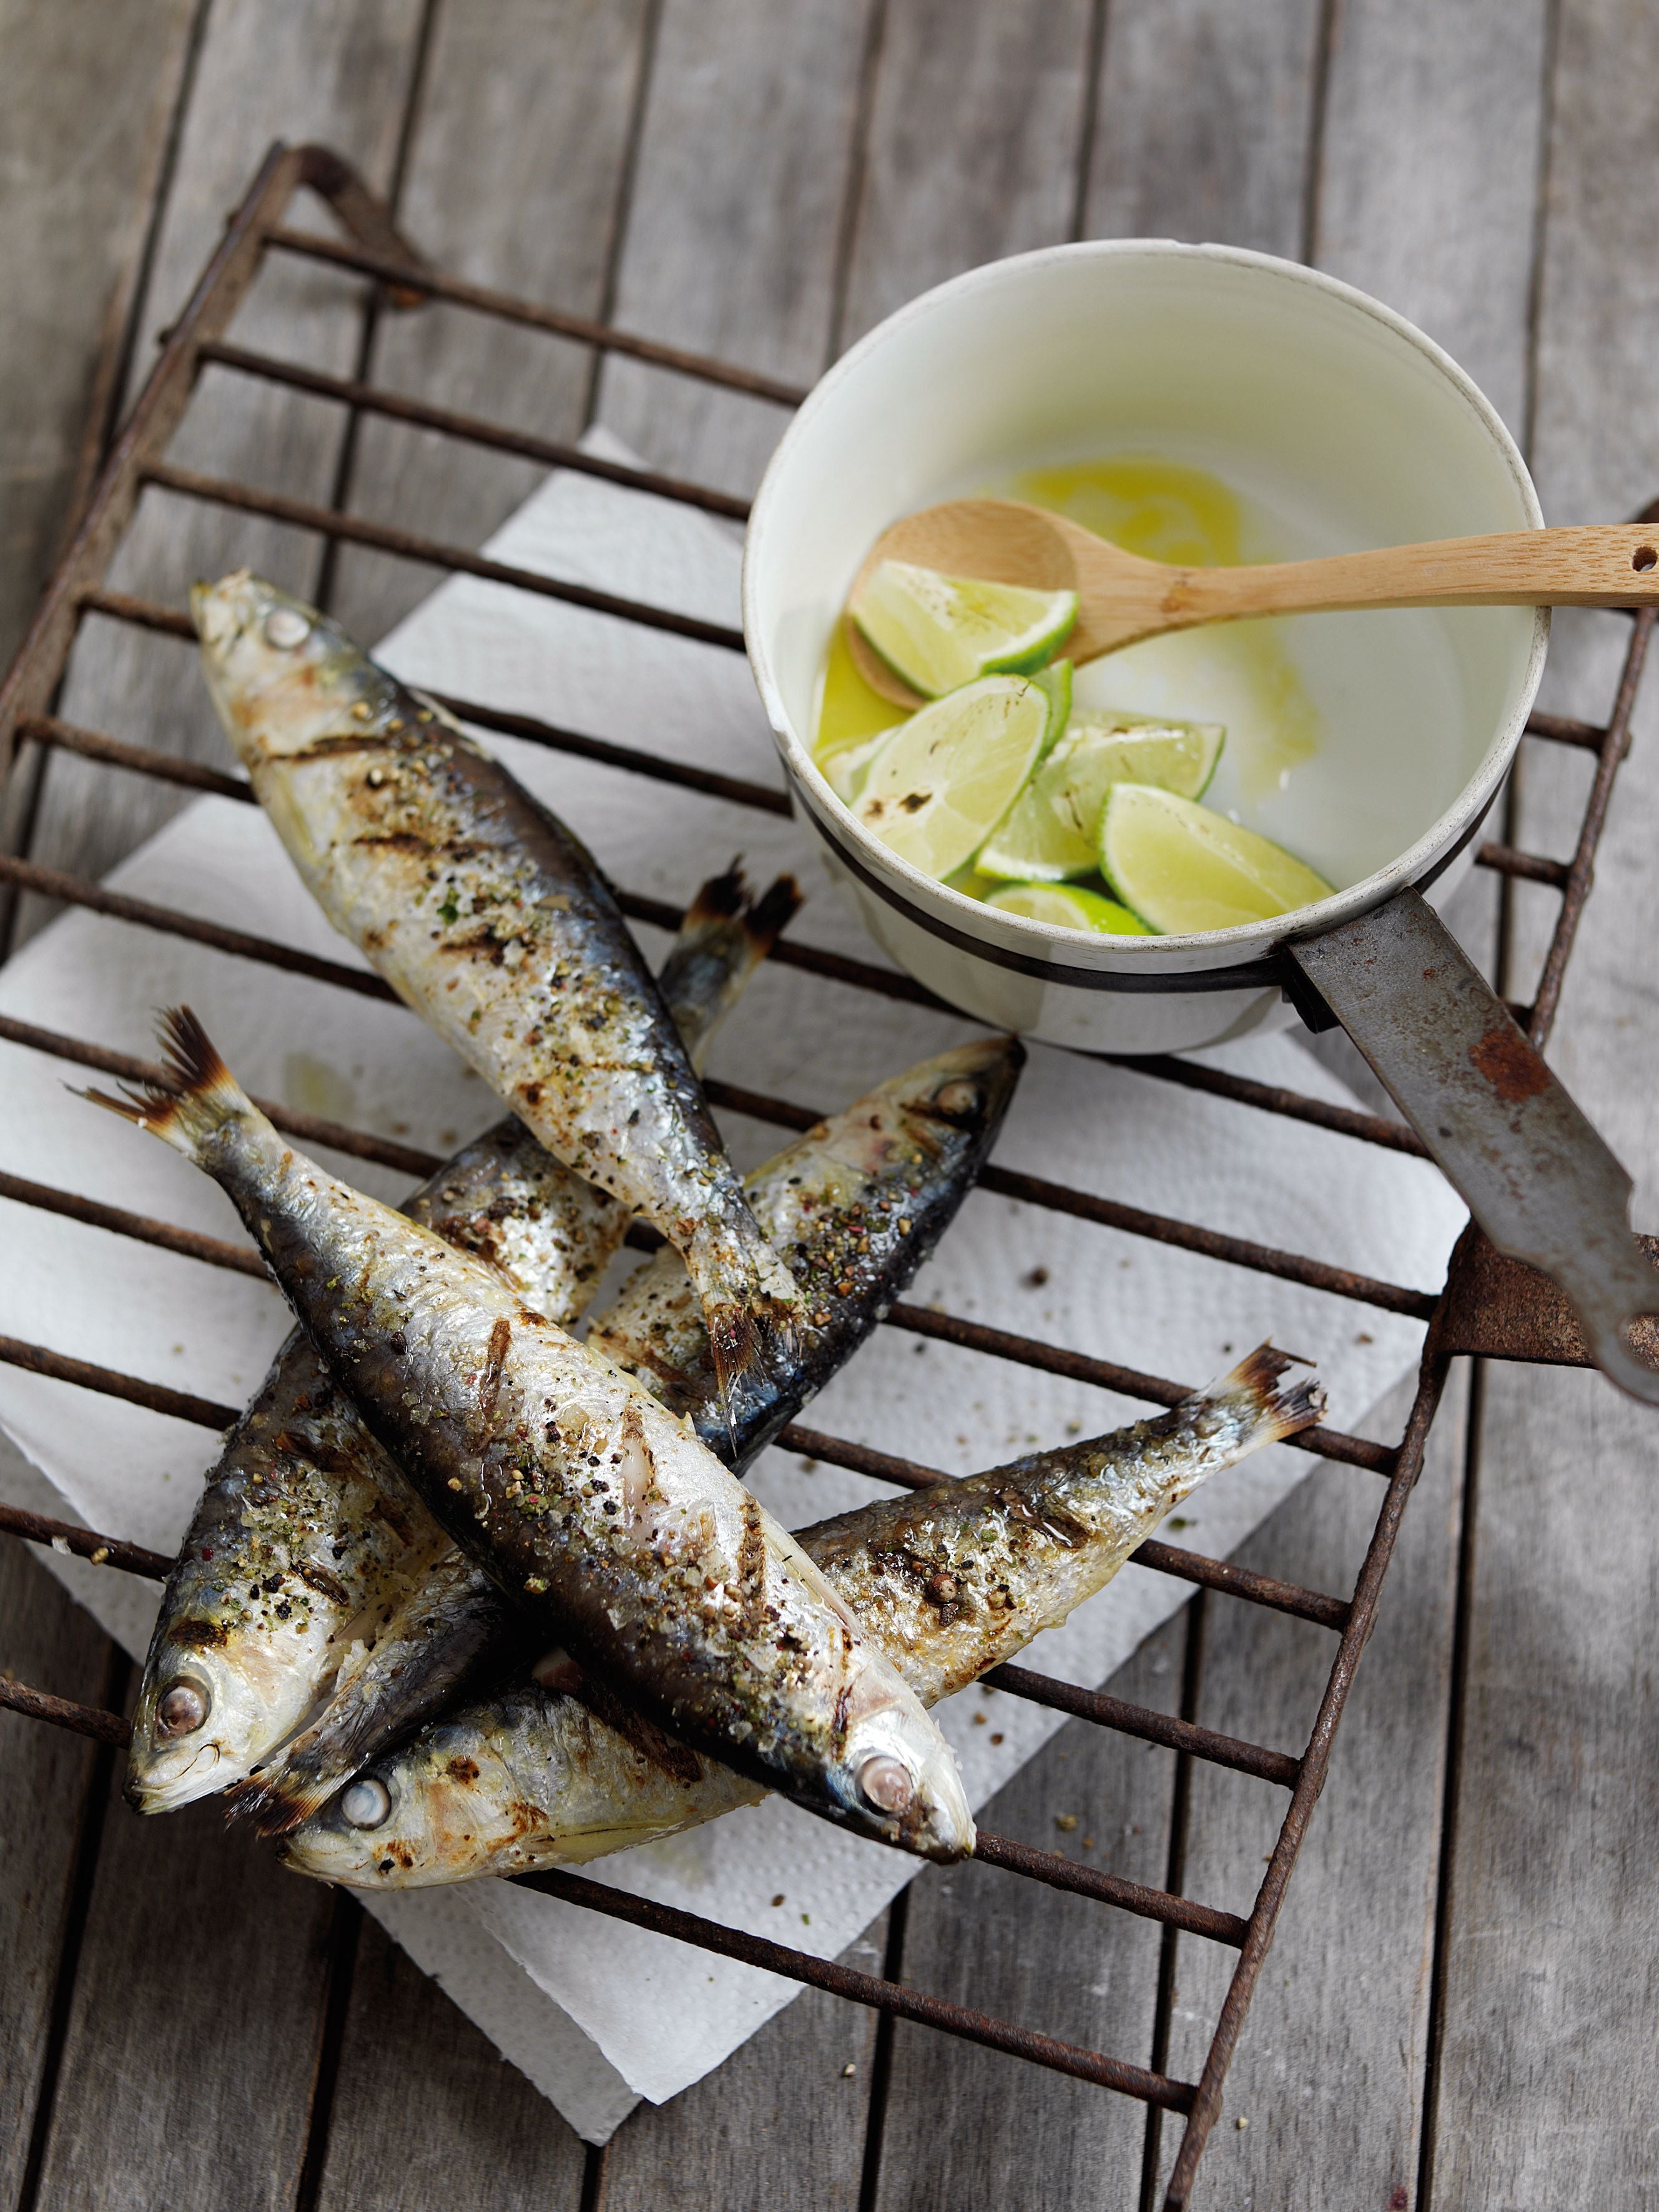 Sardines are the perfect grilling fish